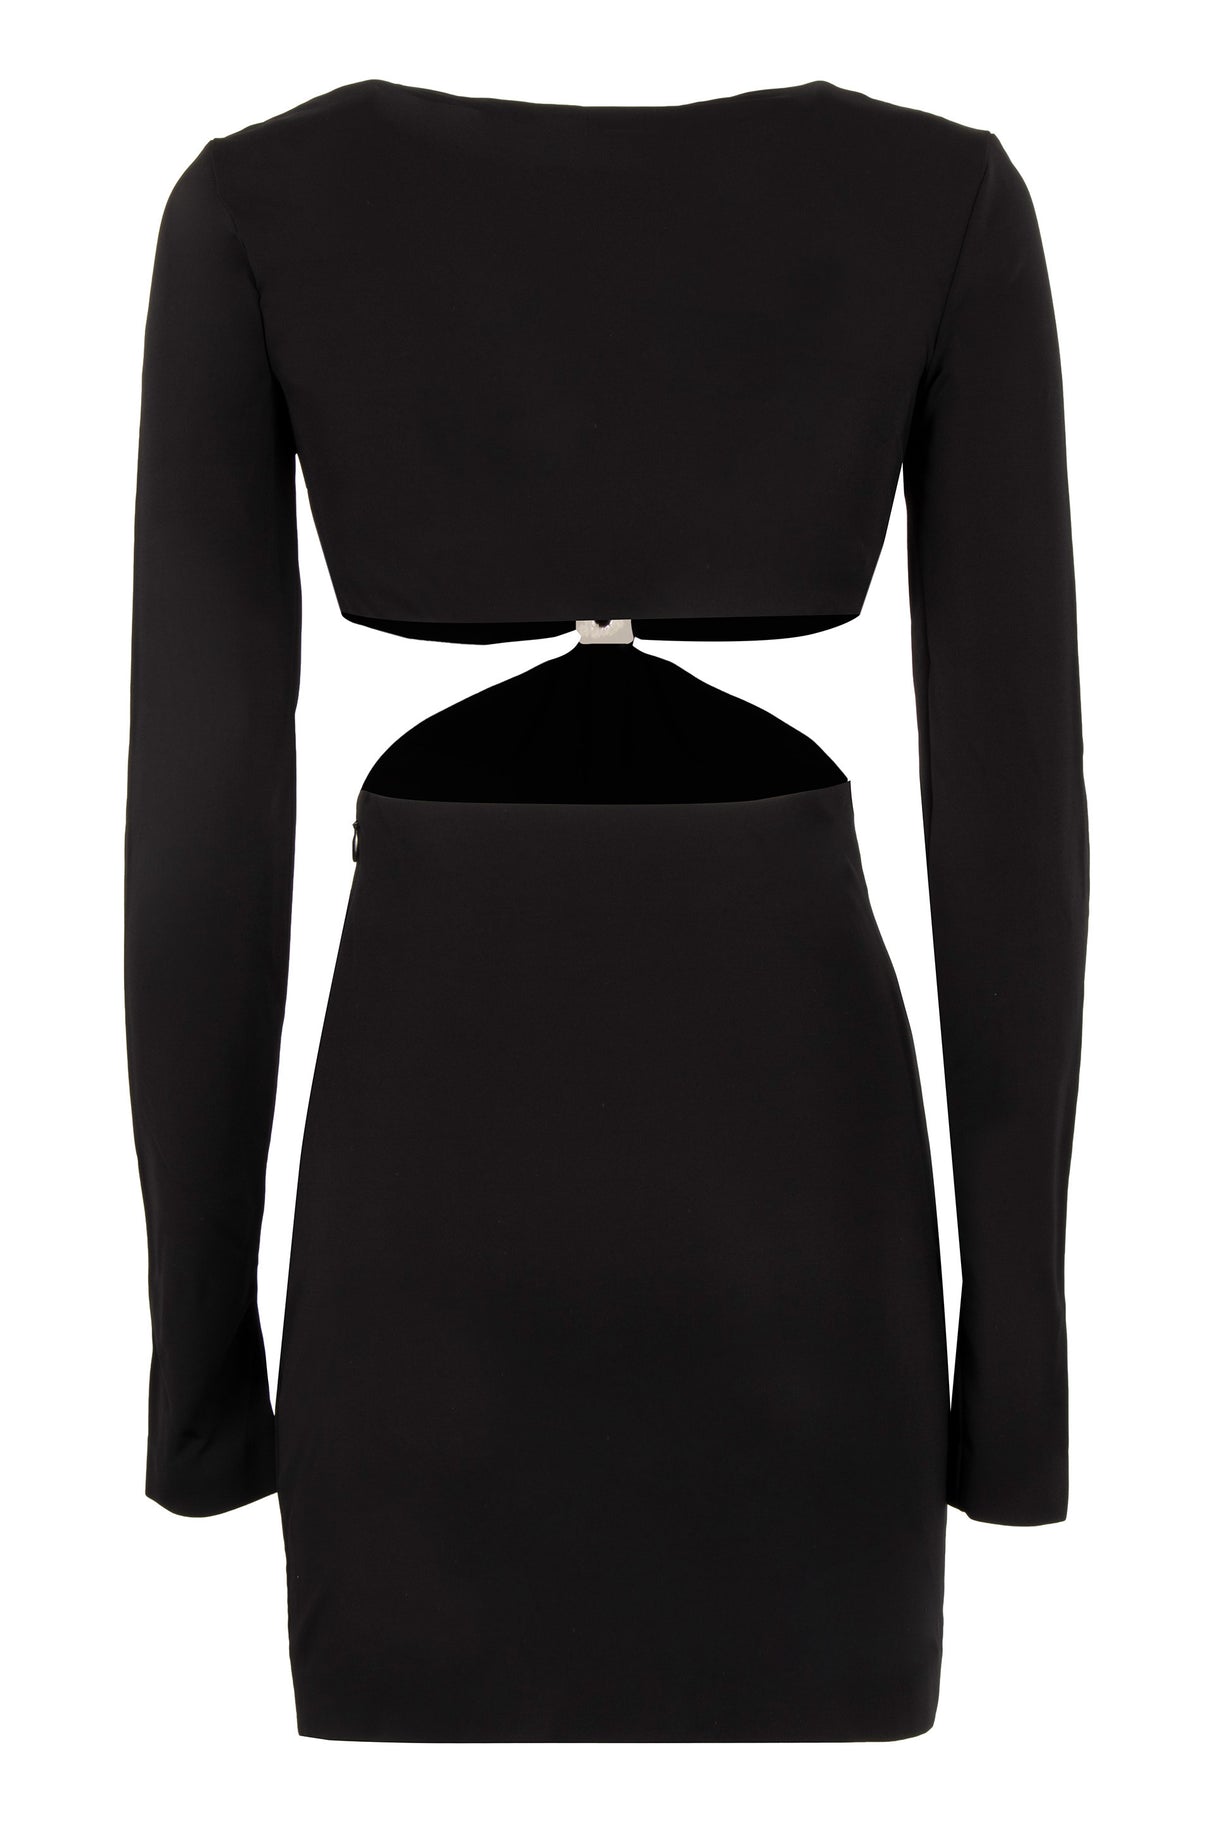 DSQUARED2 Stylish Black Cut-Out Mini Dress for Women - FW23 Collection